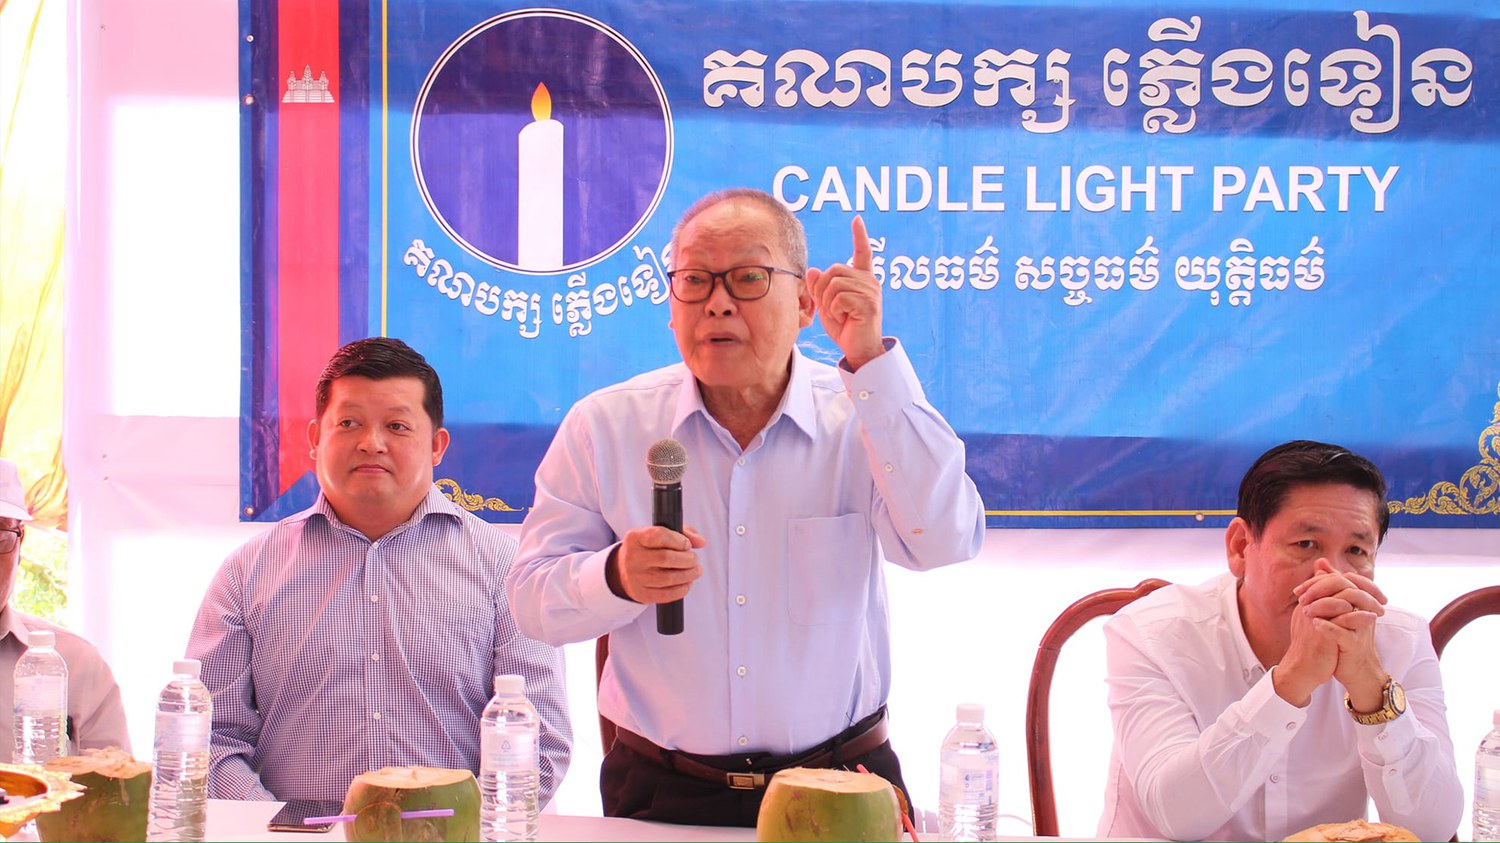 Hun Sen demands opposition party advisor vacate his home within the month — Radio Free Asia